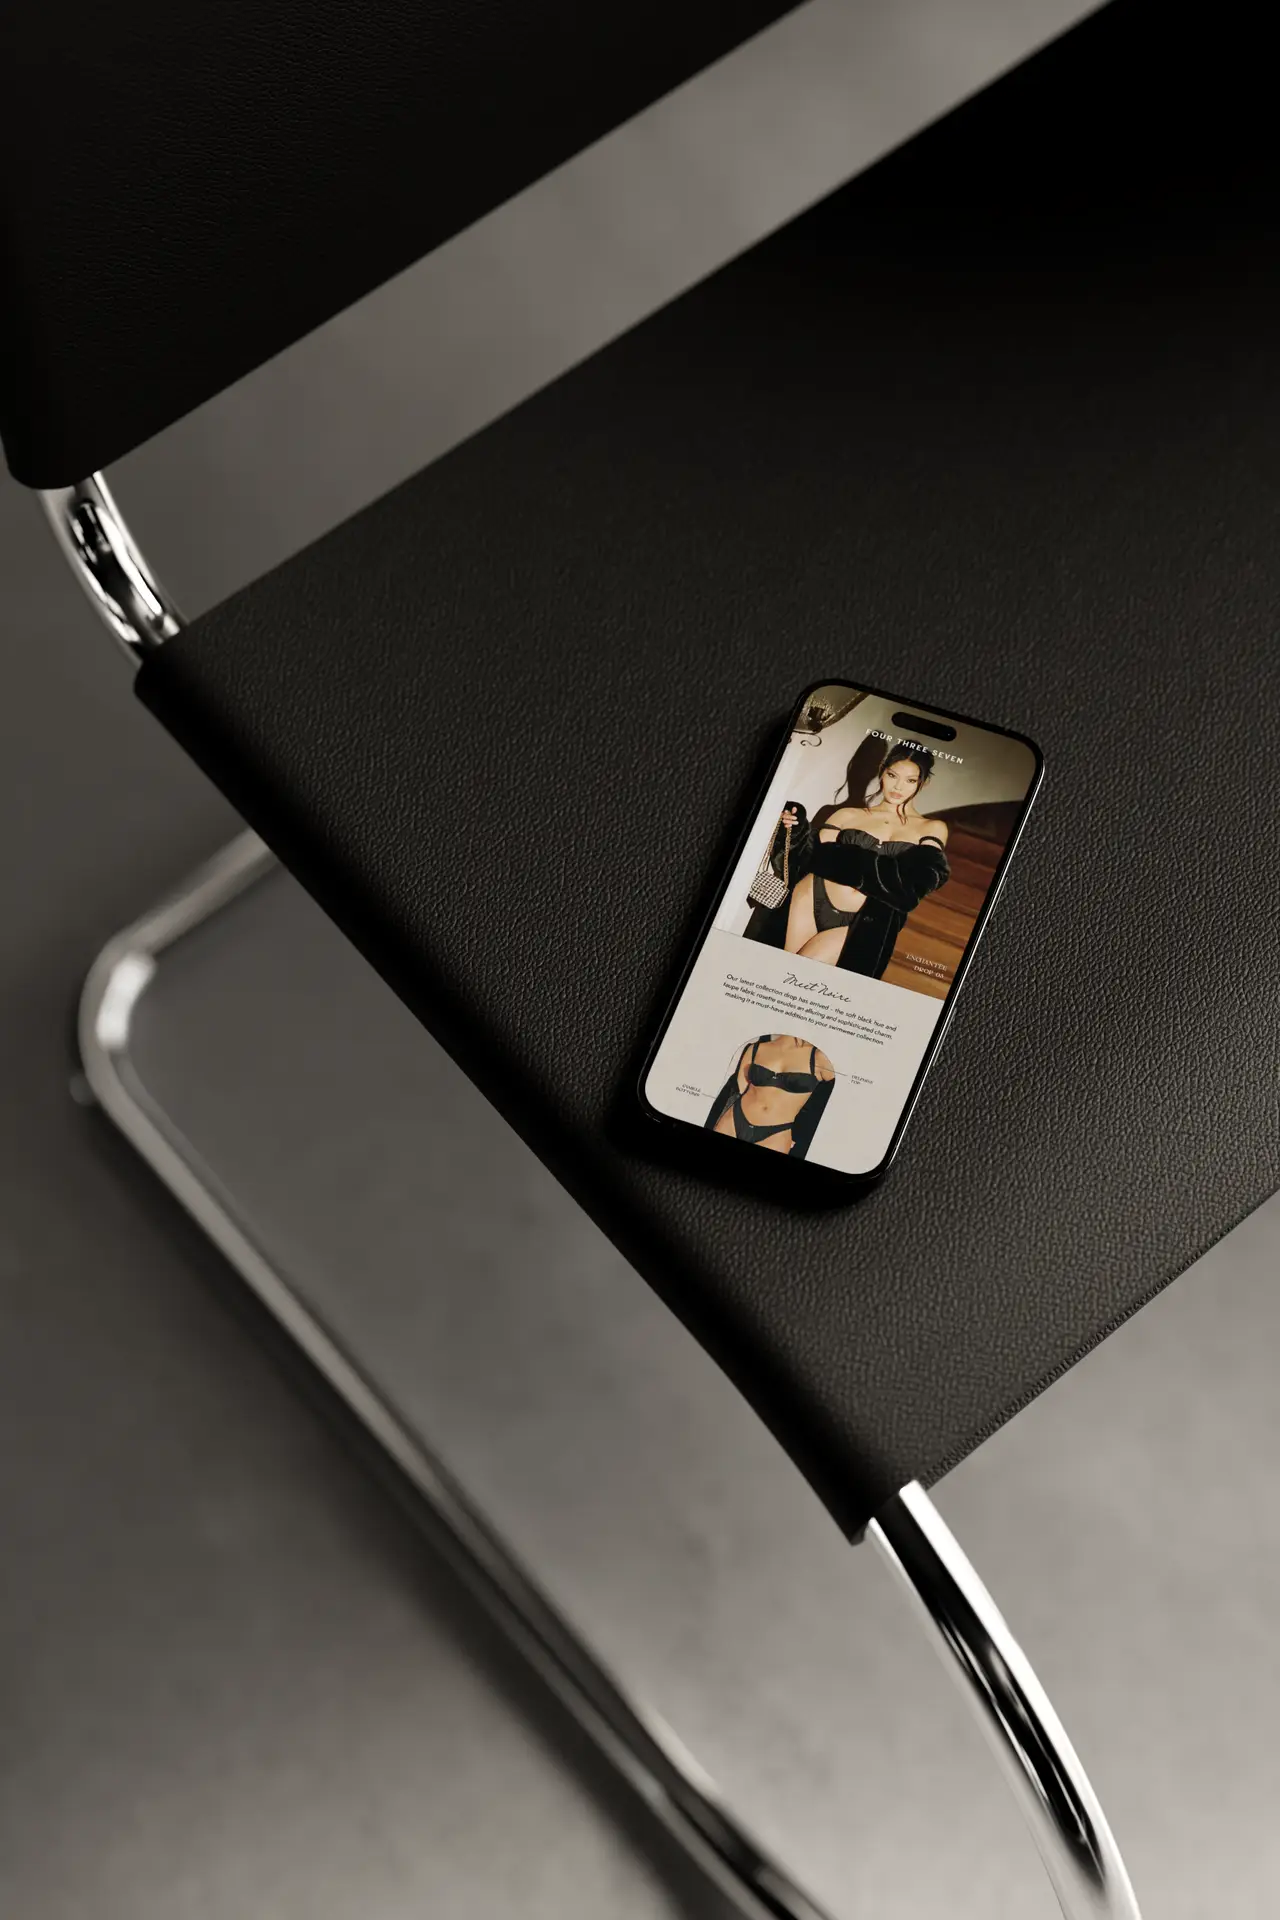 email design in phone mockup on chair